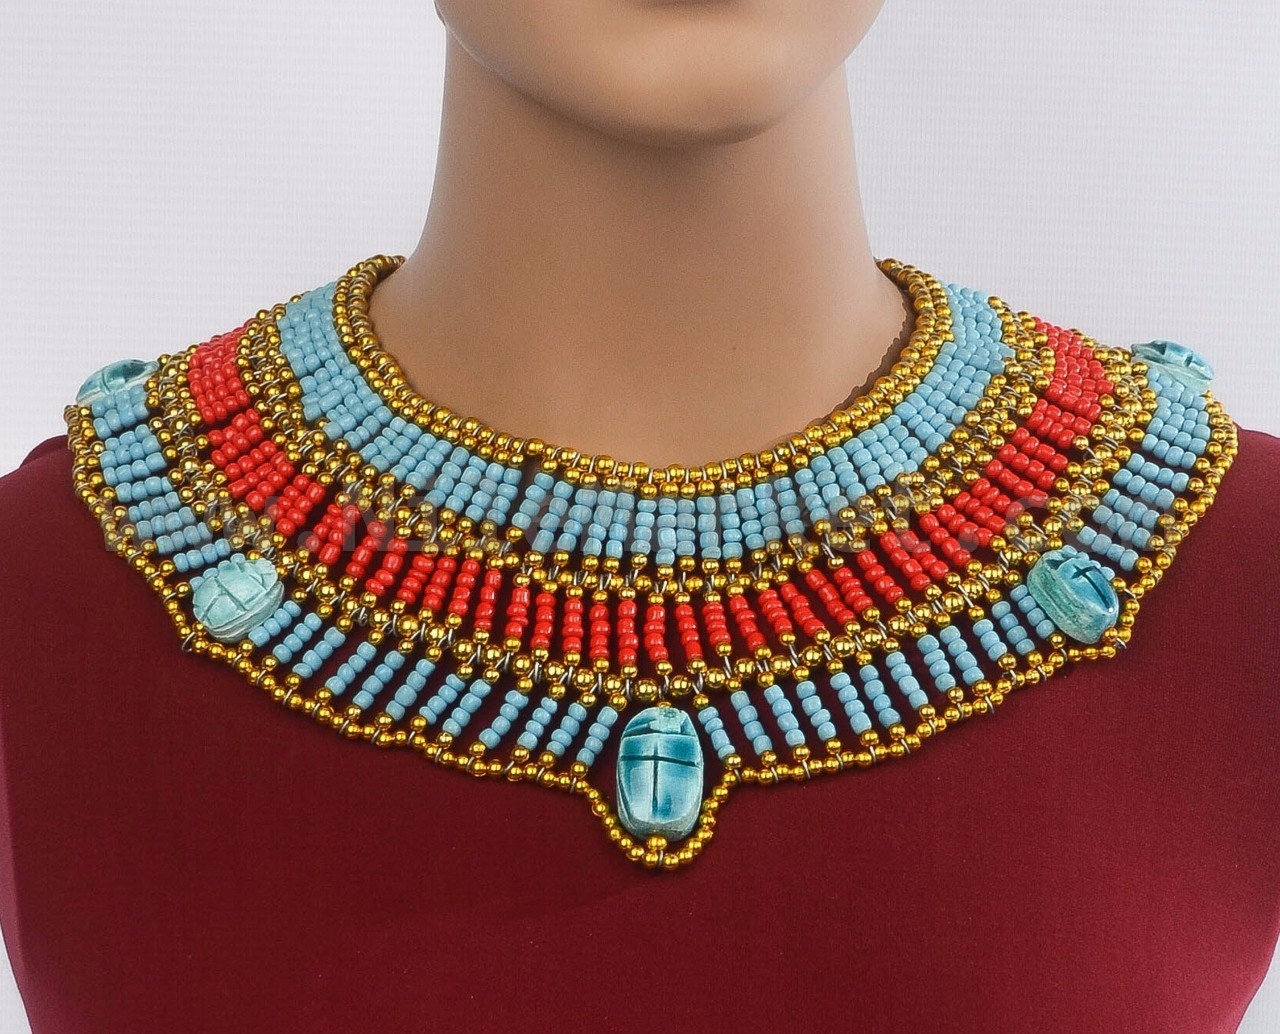 Egyptian Hand Made Multi Beaded Scarab Beetle Beads Cleopatra Nefertiti Queen 9.5 Necklace Collar Choker Pendant Christmas Halloween Ancient Egypt Pharaoh Costume Accessory Jewelry Belly Dance 234